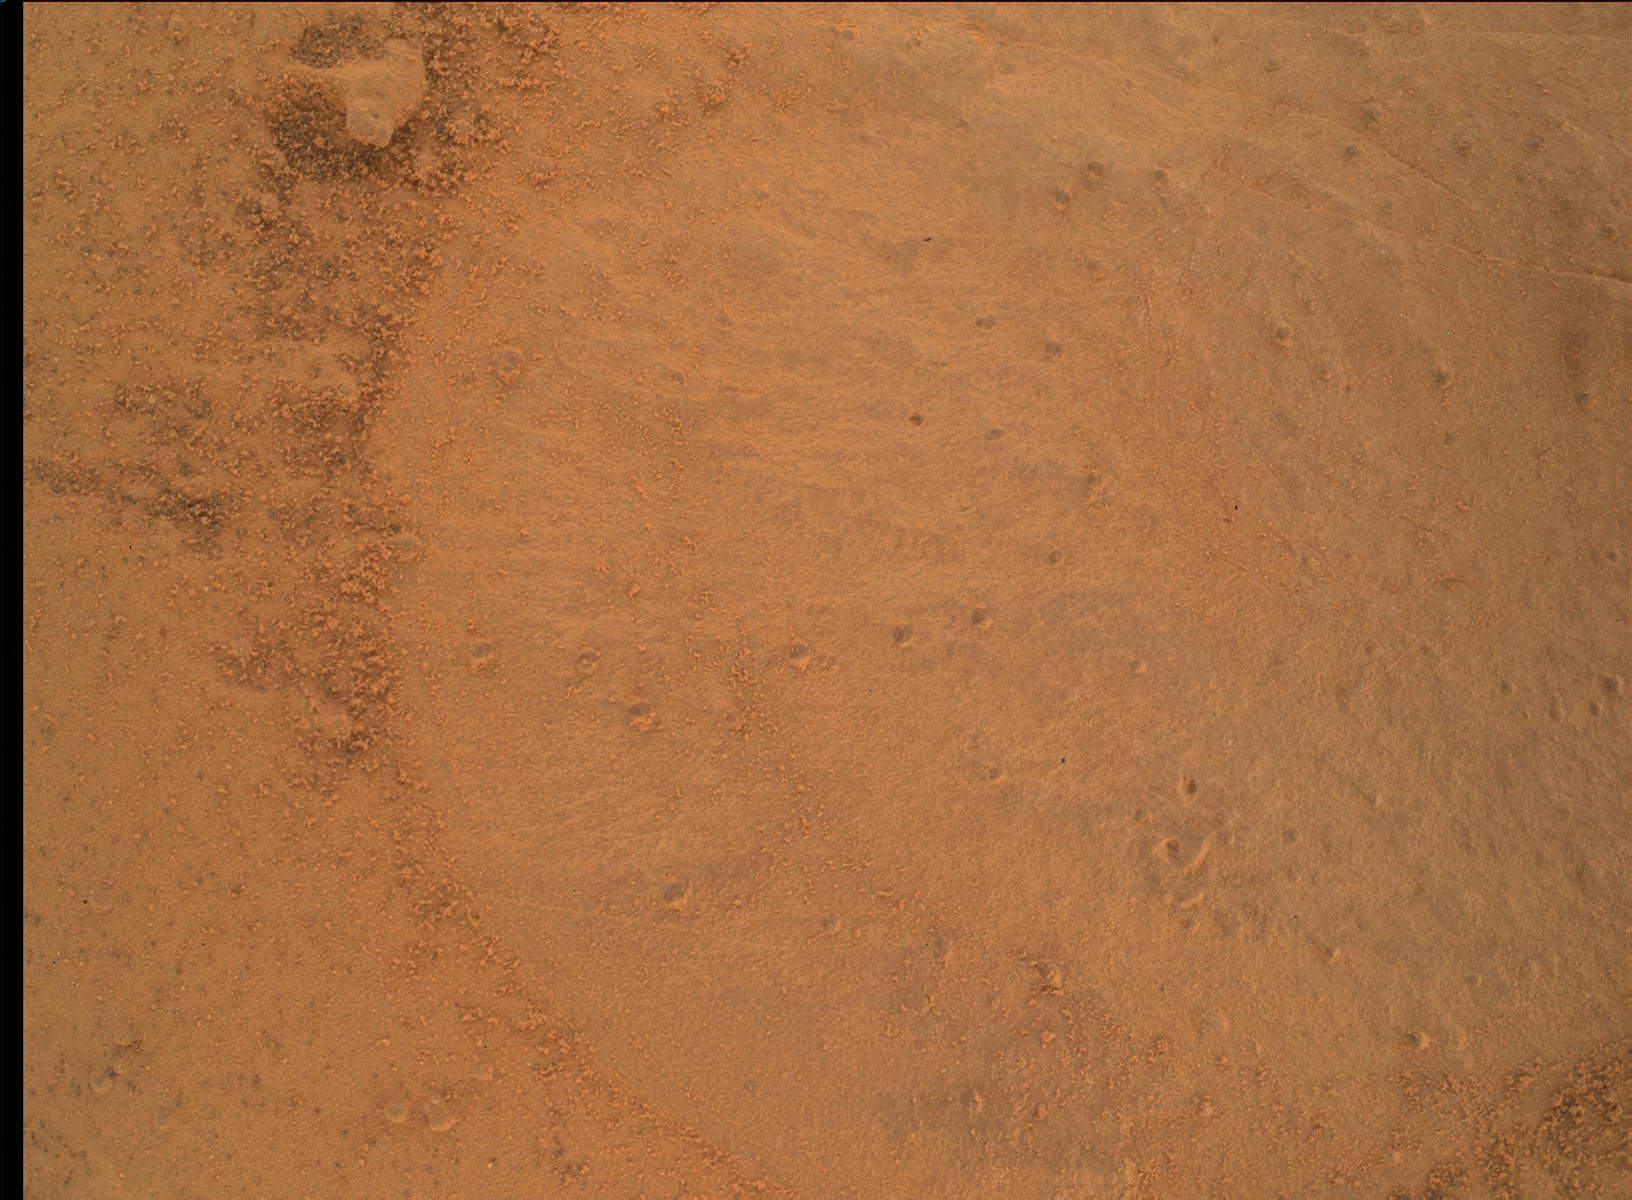 Nasa's Mars rover Curiosity acquired this image using its Mars Hand Lens Imager (MAHLI) on Sol 2134